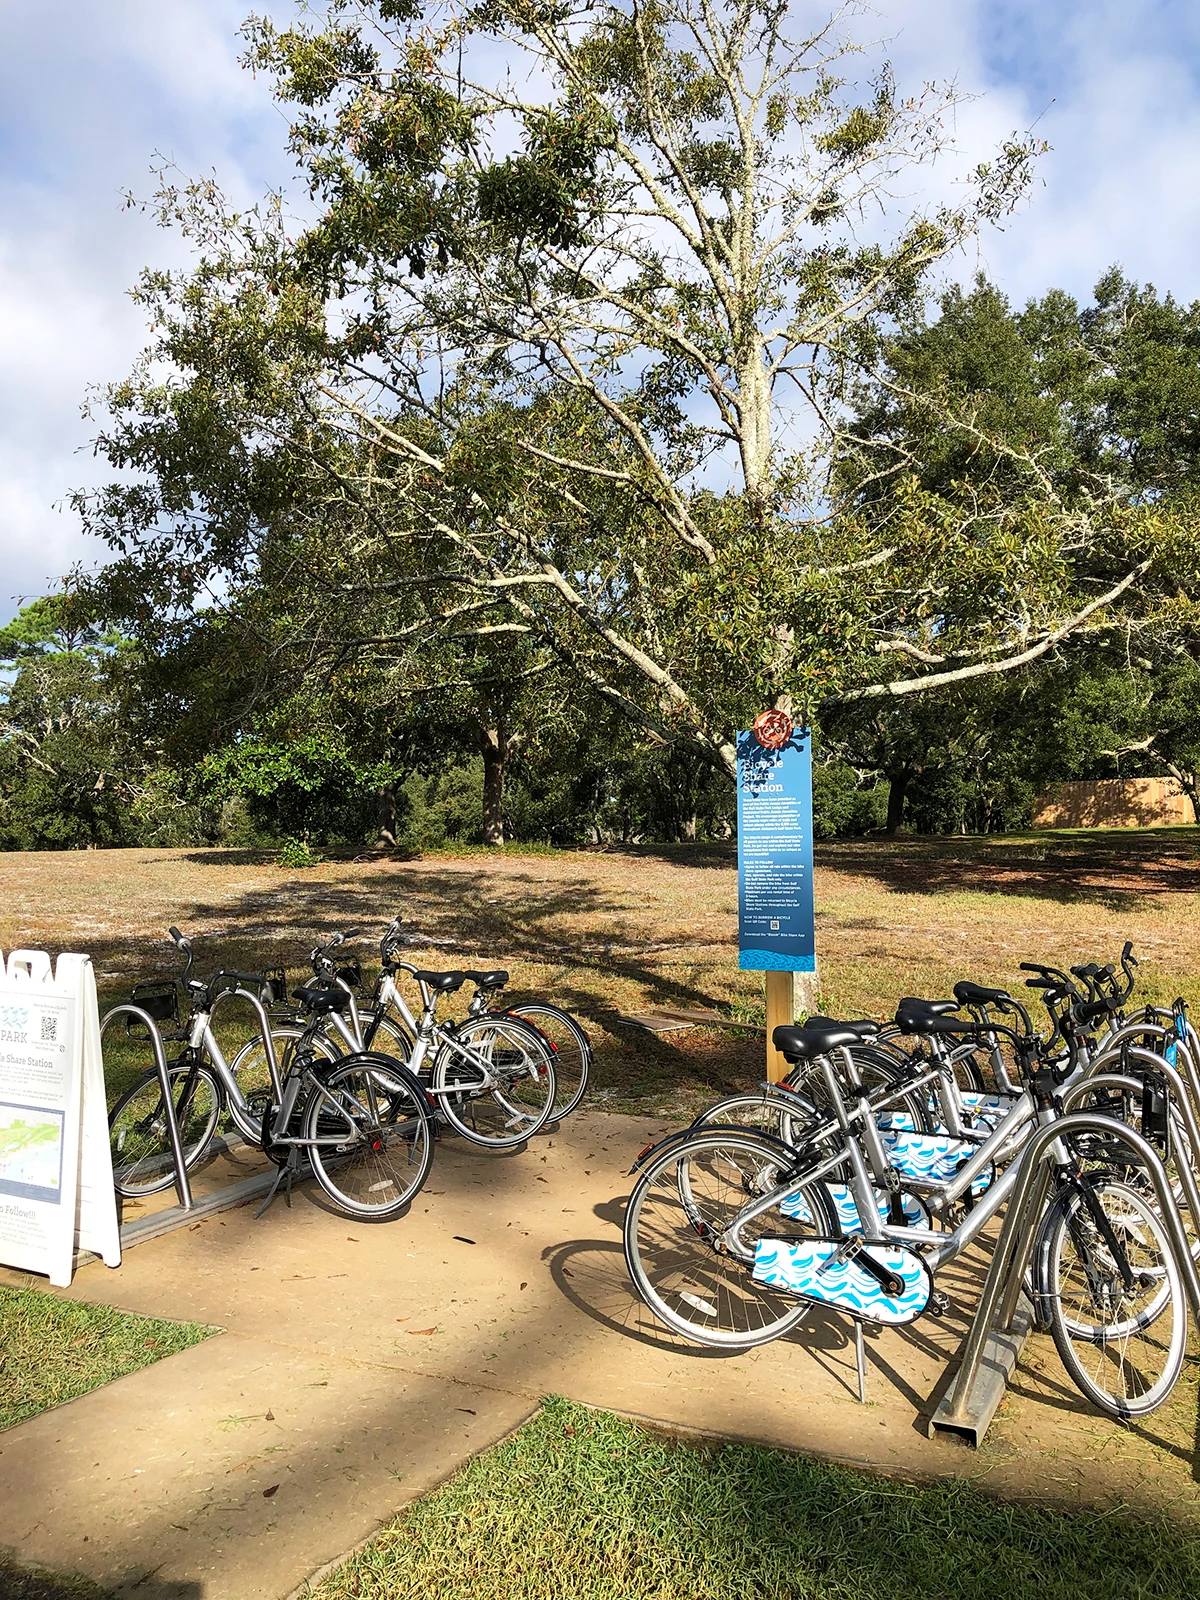 bikes and tree in partly shaded area